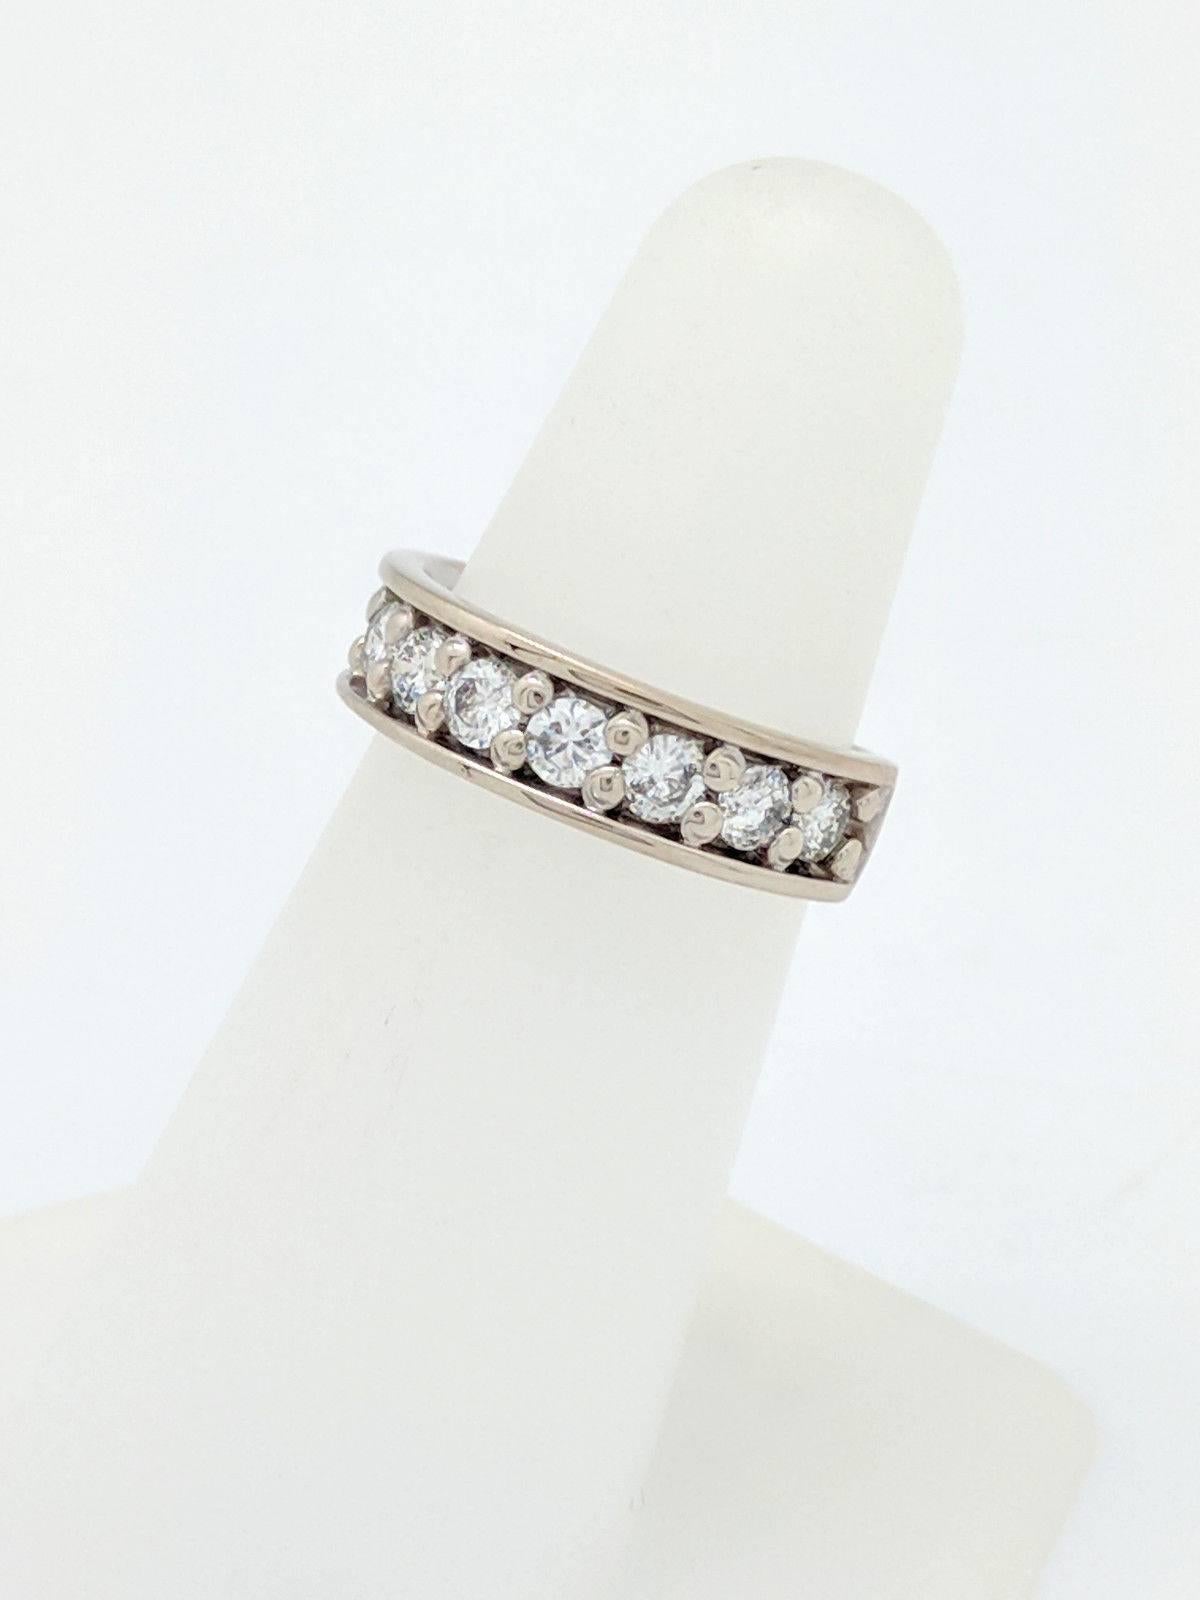 14 Karat White Gold 1 Carat Prong Set Diamond Wedding Band Ring In Excellent Condition For Sale In Gainesville, FL